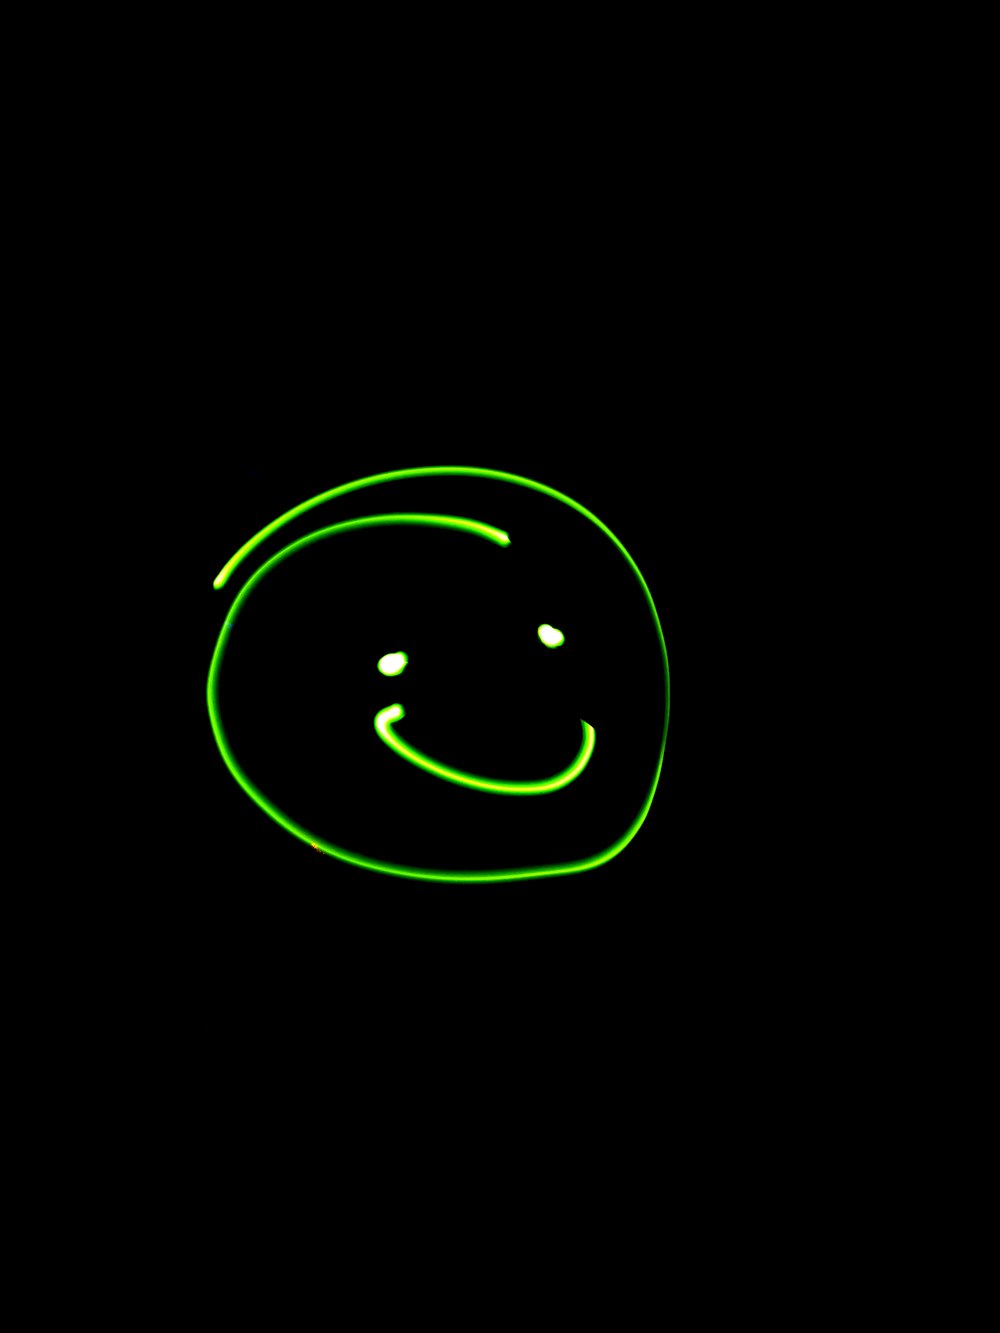 a green smiley face on a black background